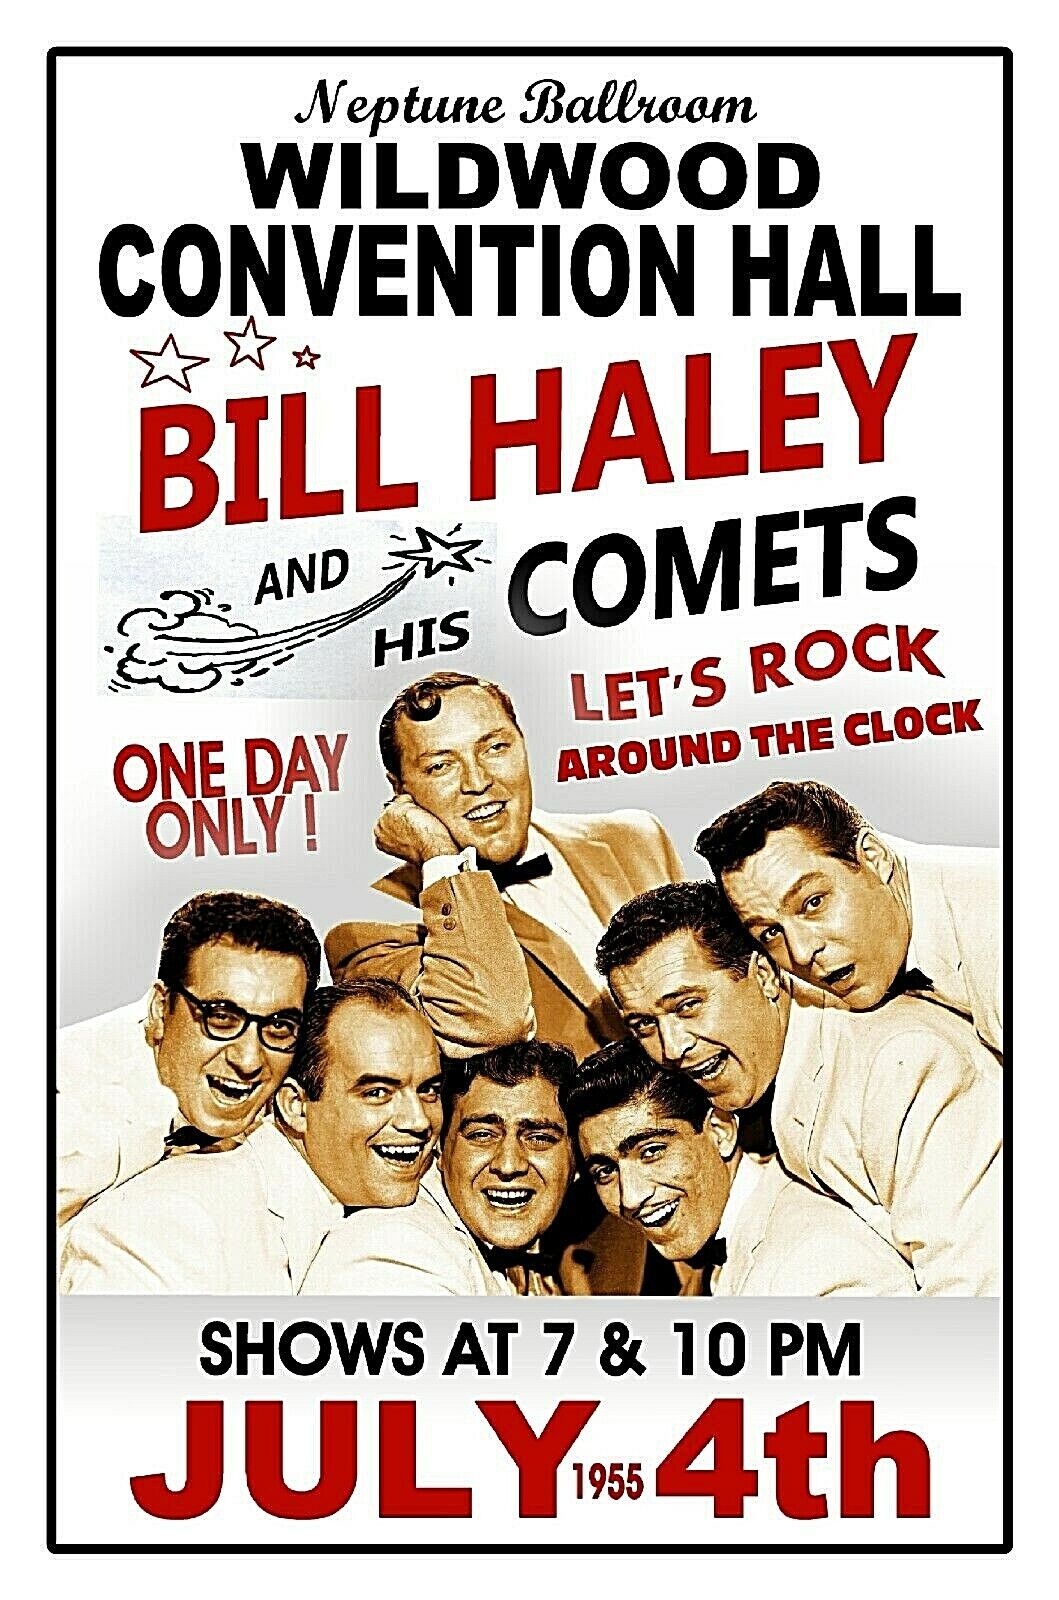 BILL HALEY & HIS COMETS 1955 Concert Poster Wildwood NJ Convention Hall GIG SIGN